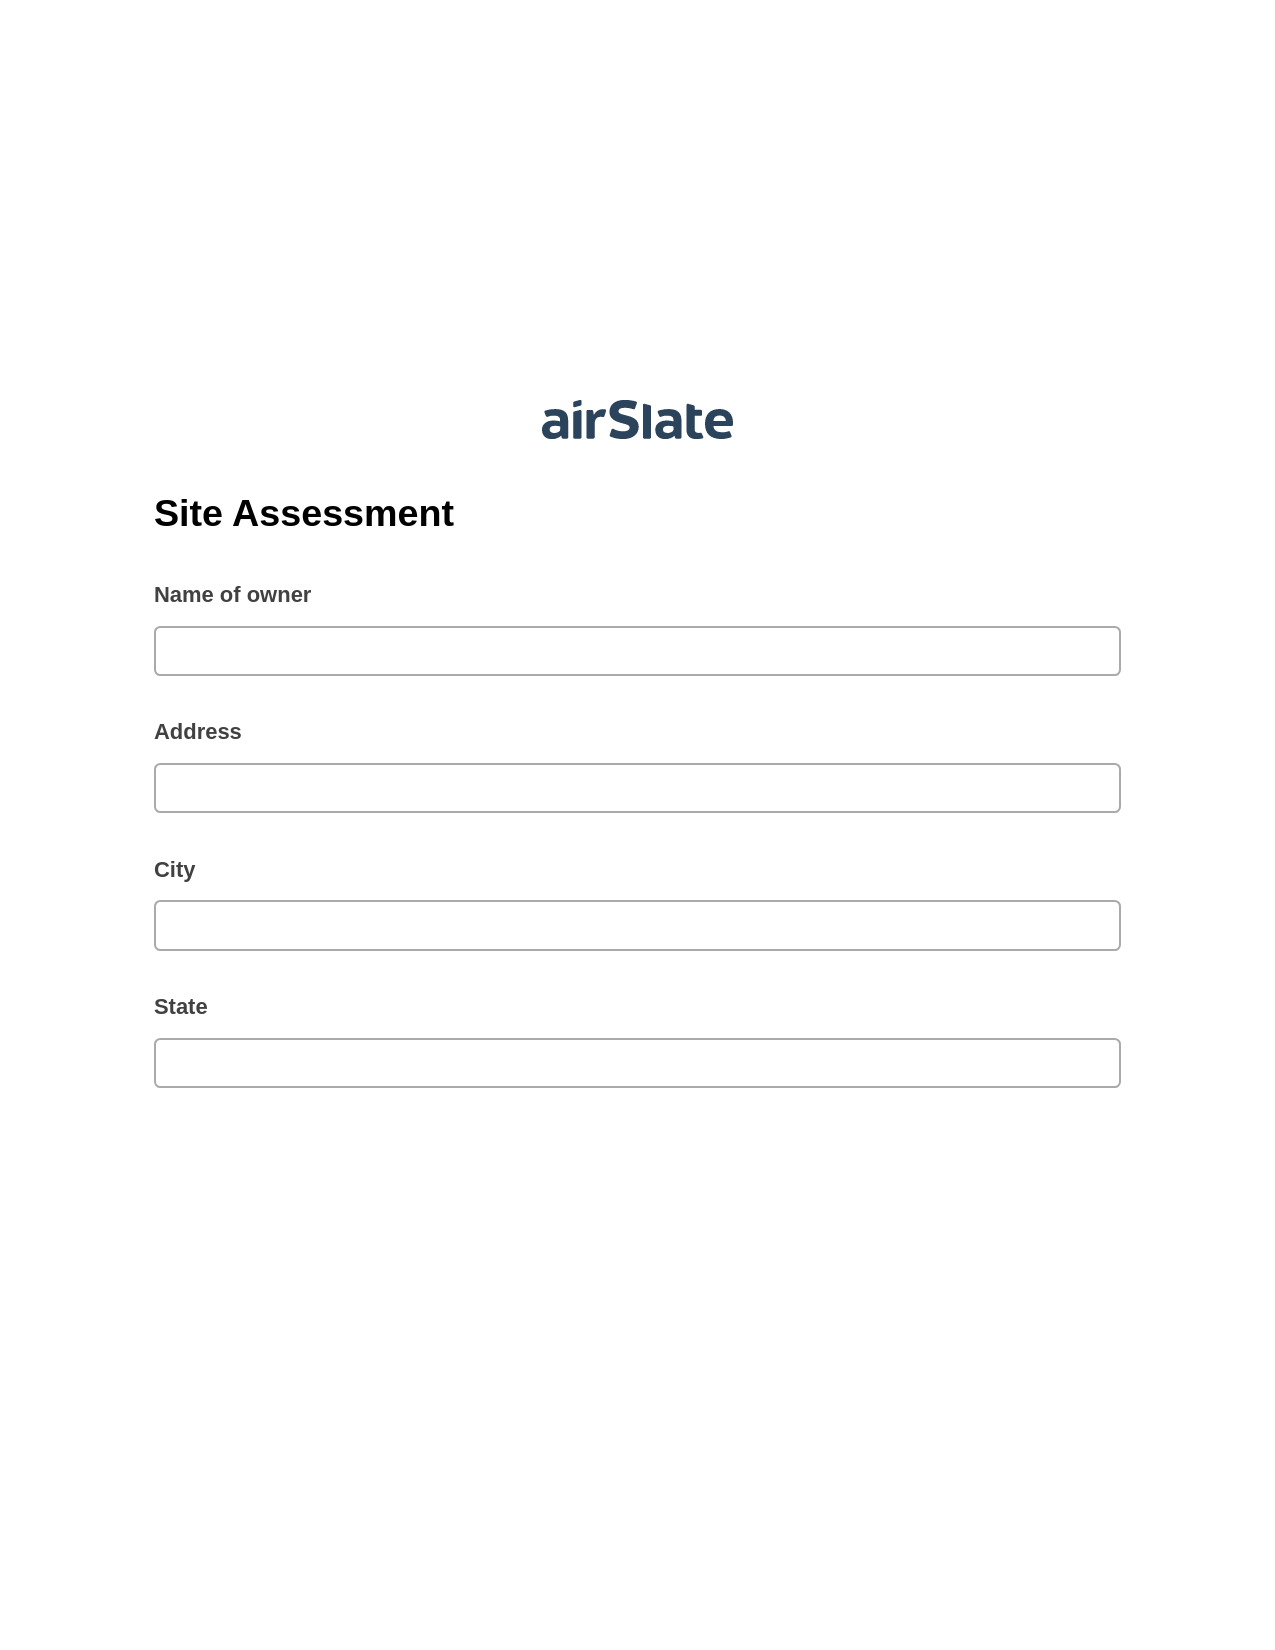 Site Assessment Pre-fill Dropdown from Airtable, Webhook Bot, Slack Two-Way Binding Bot